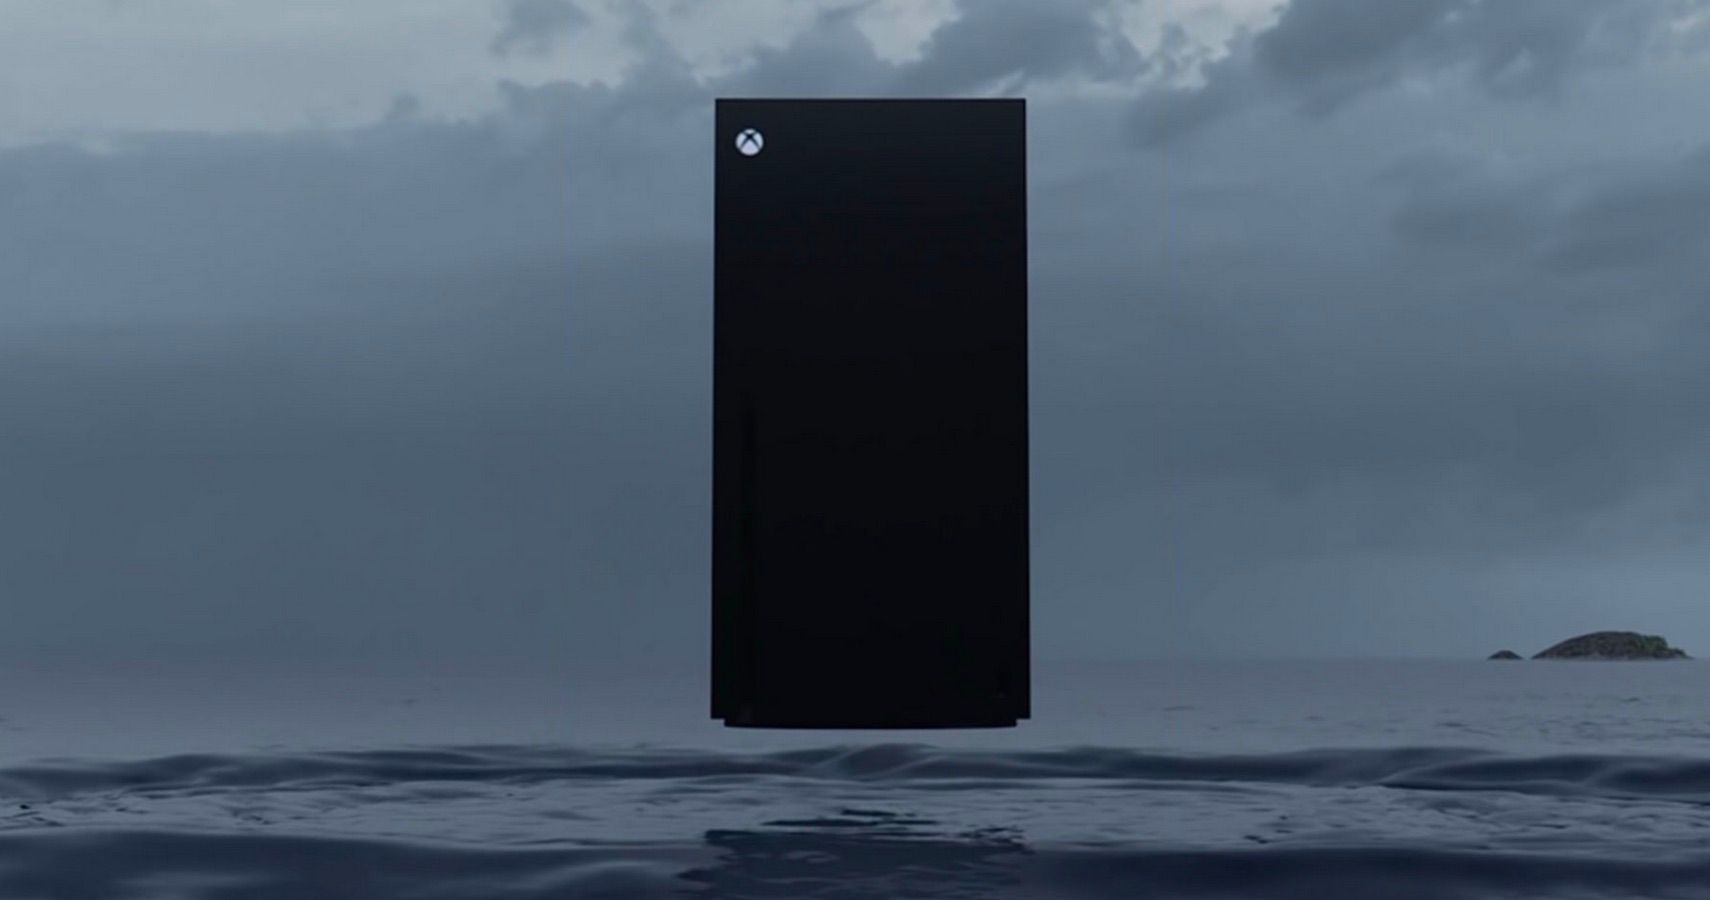 Xbox Series X floating above water